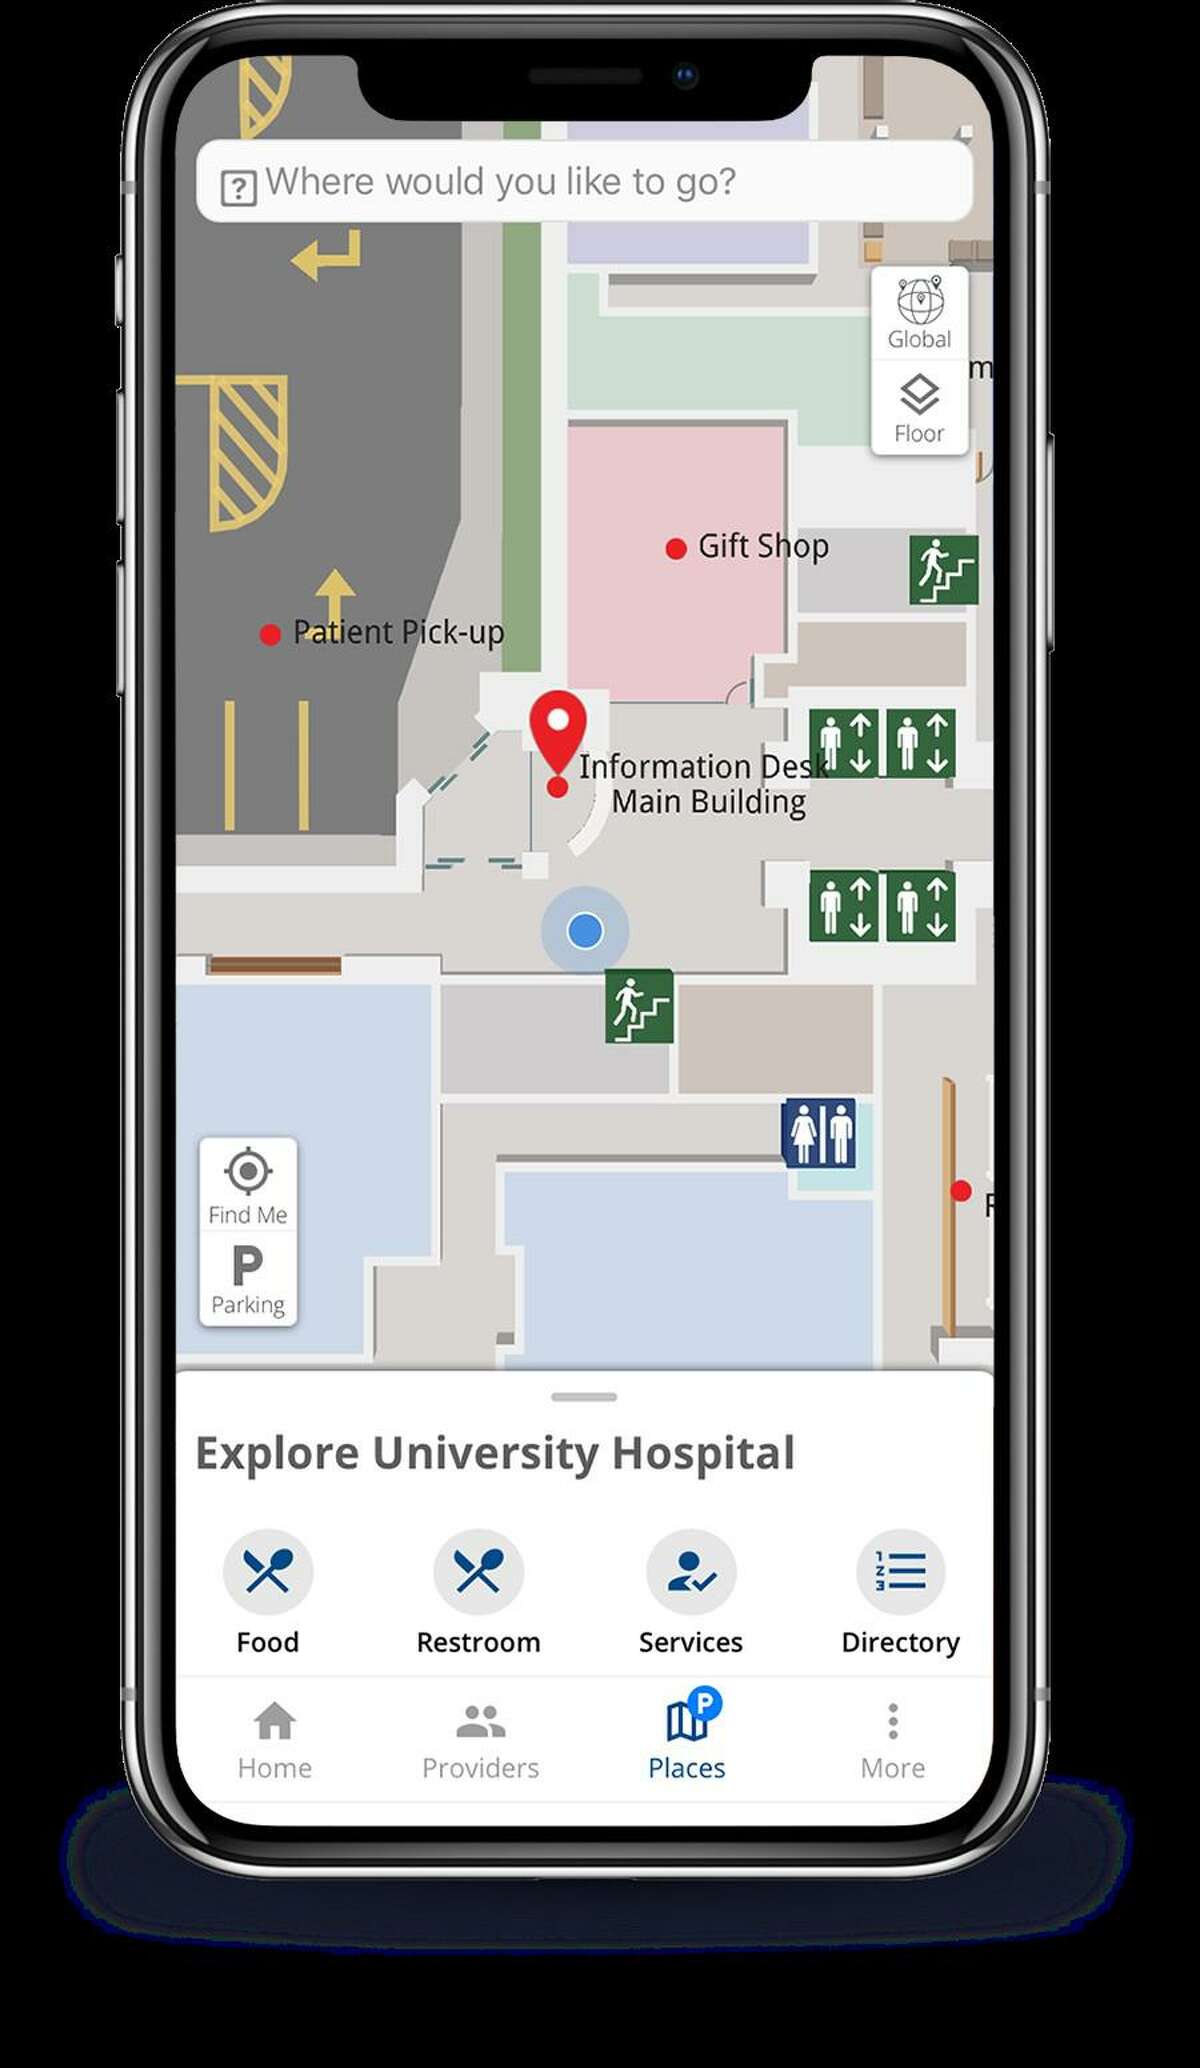 University Health System has selected Atlanta-based Gozio Health to develop the system’s interactive mobile wayfinding platform, which will provide indoor navigation with an accuracy within four feet.